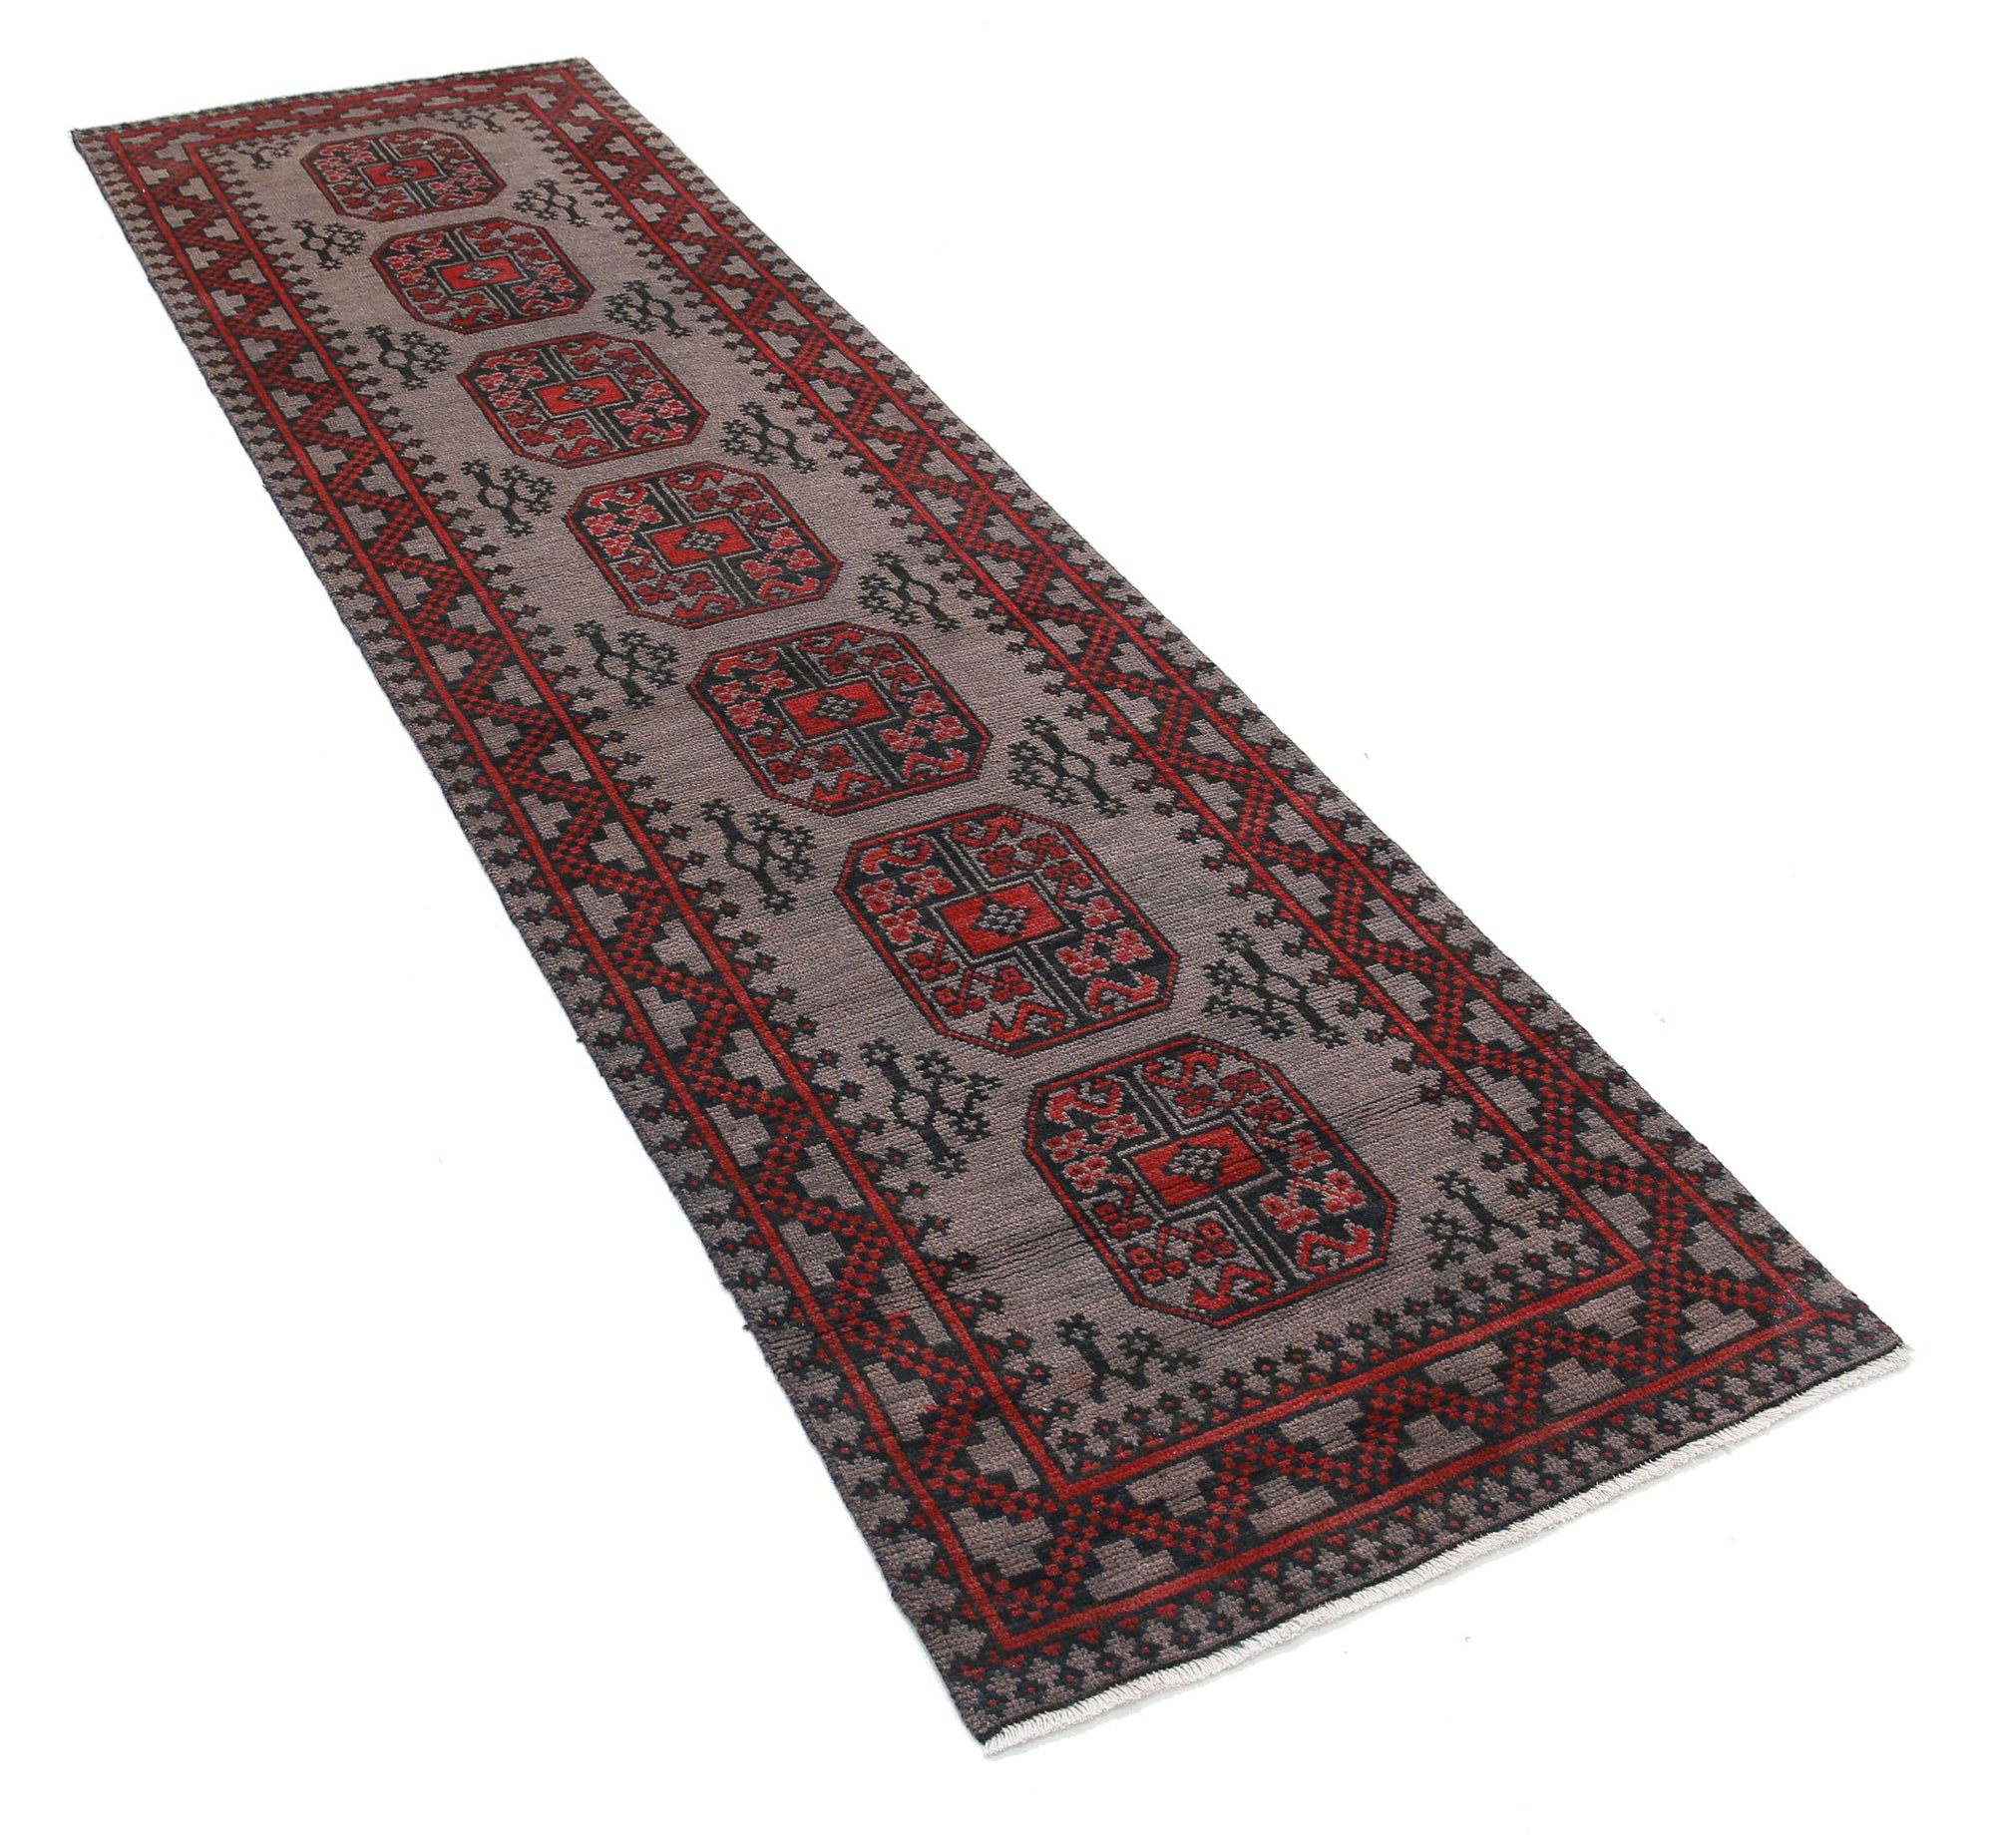 Revival-hand-knotted-gul-collection-wool-rug-5013996-1.jpg